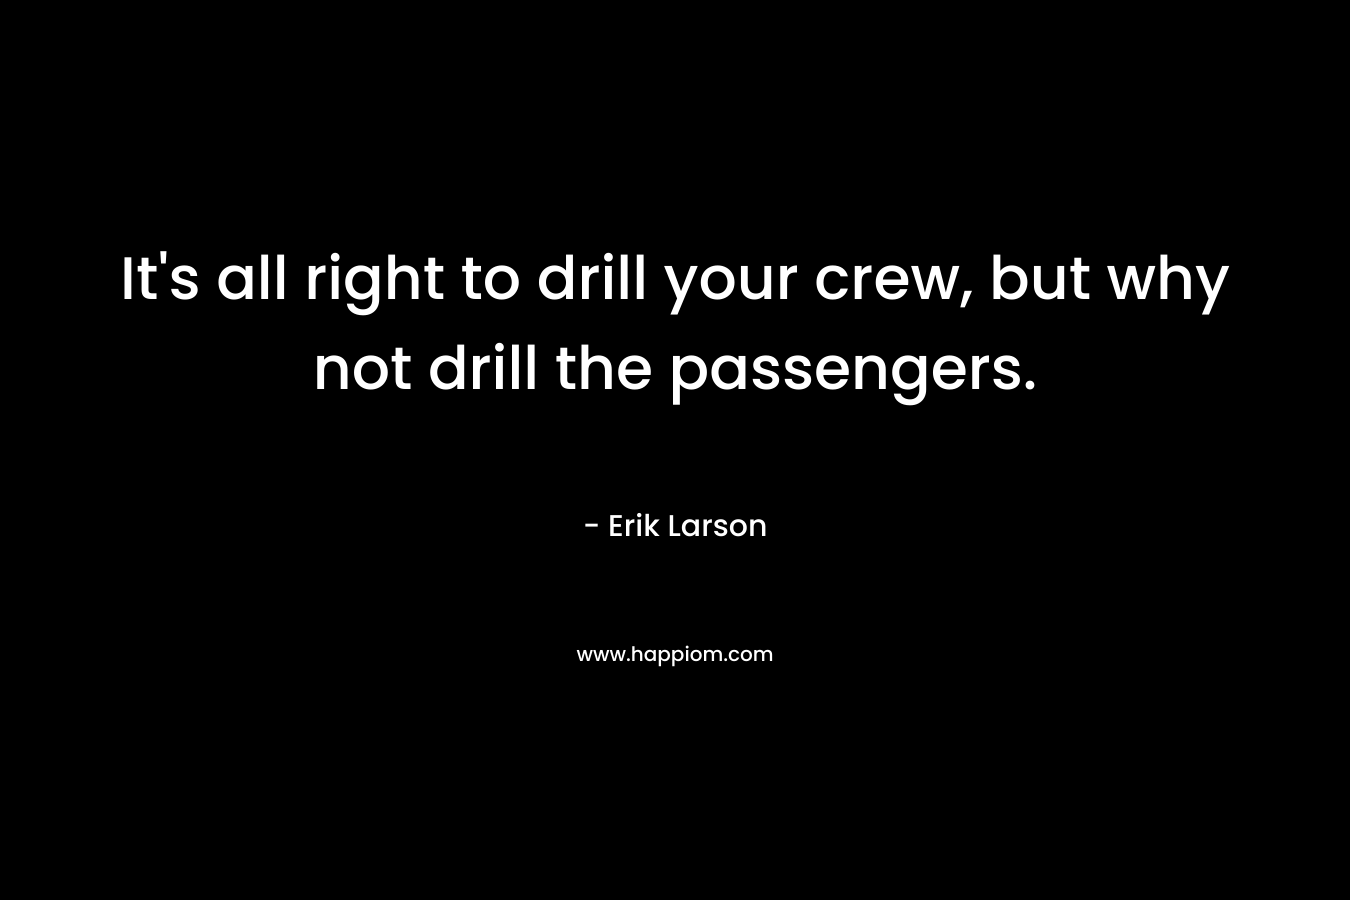 It’s all right to drill your crew, but why not drill the passengers. – Erik Larson